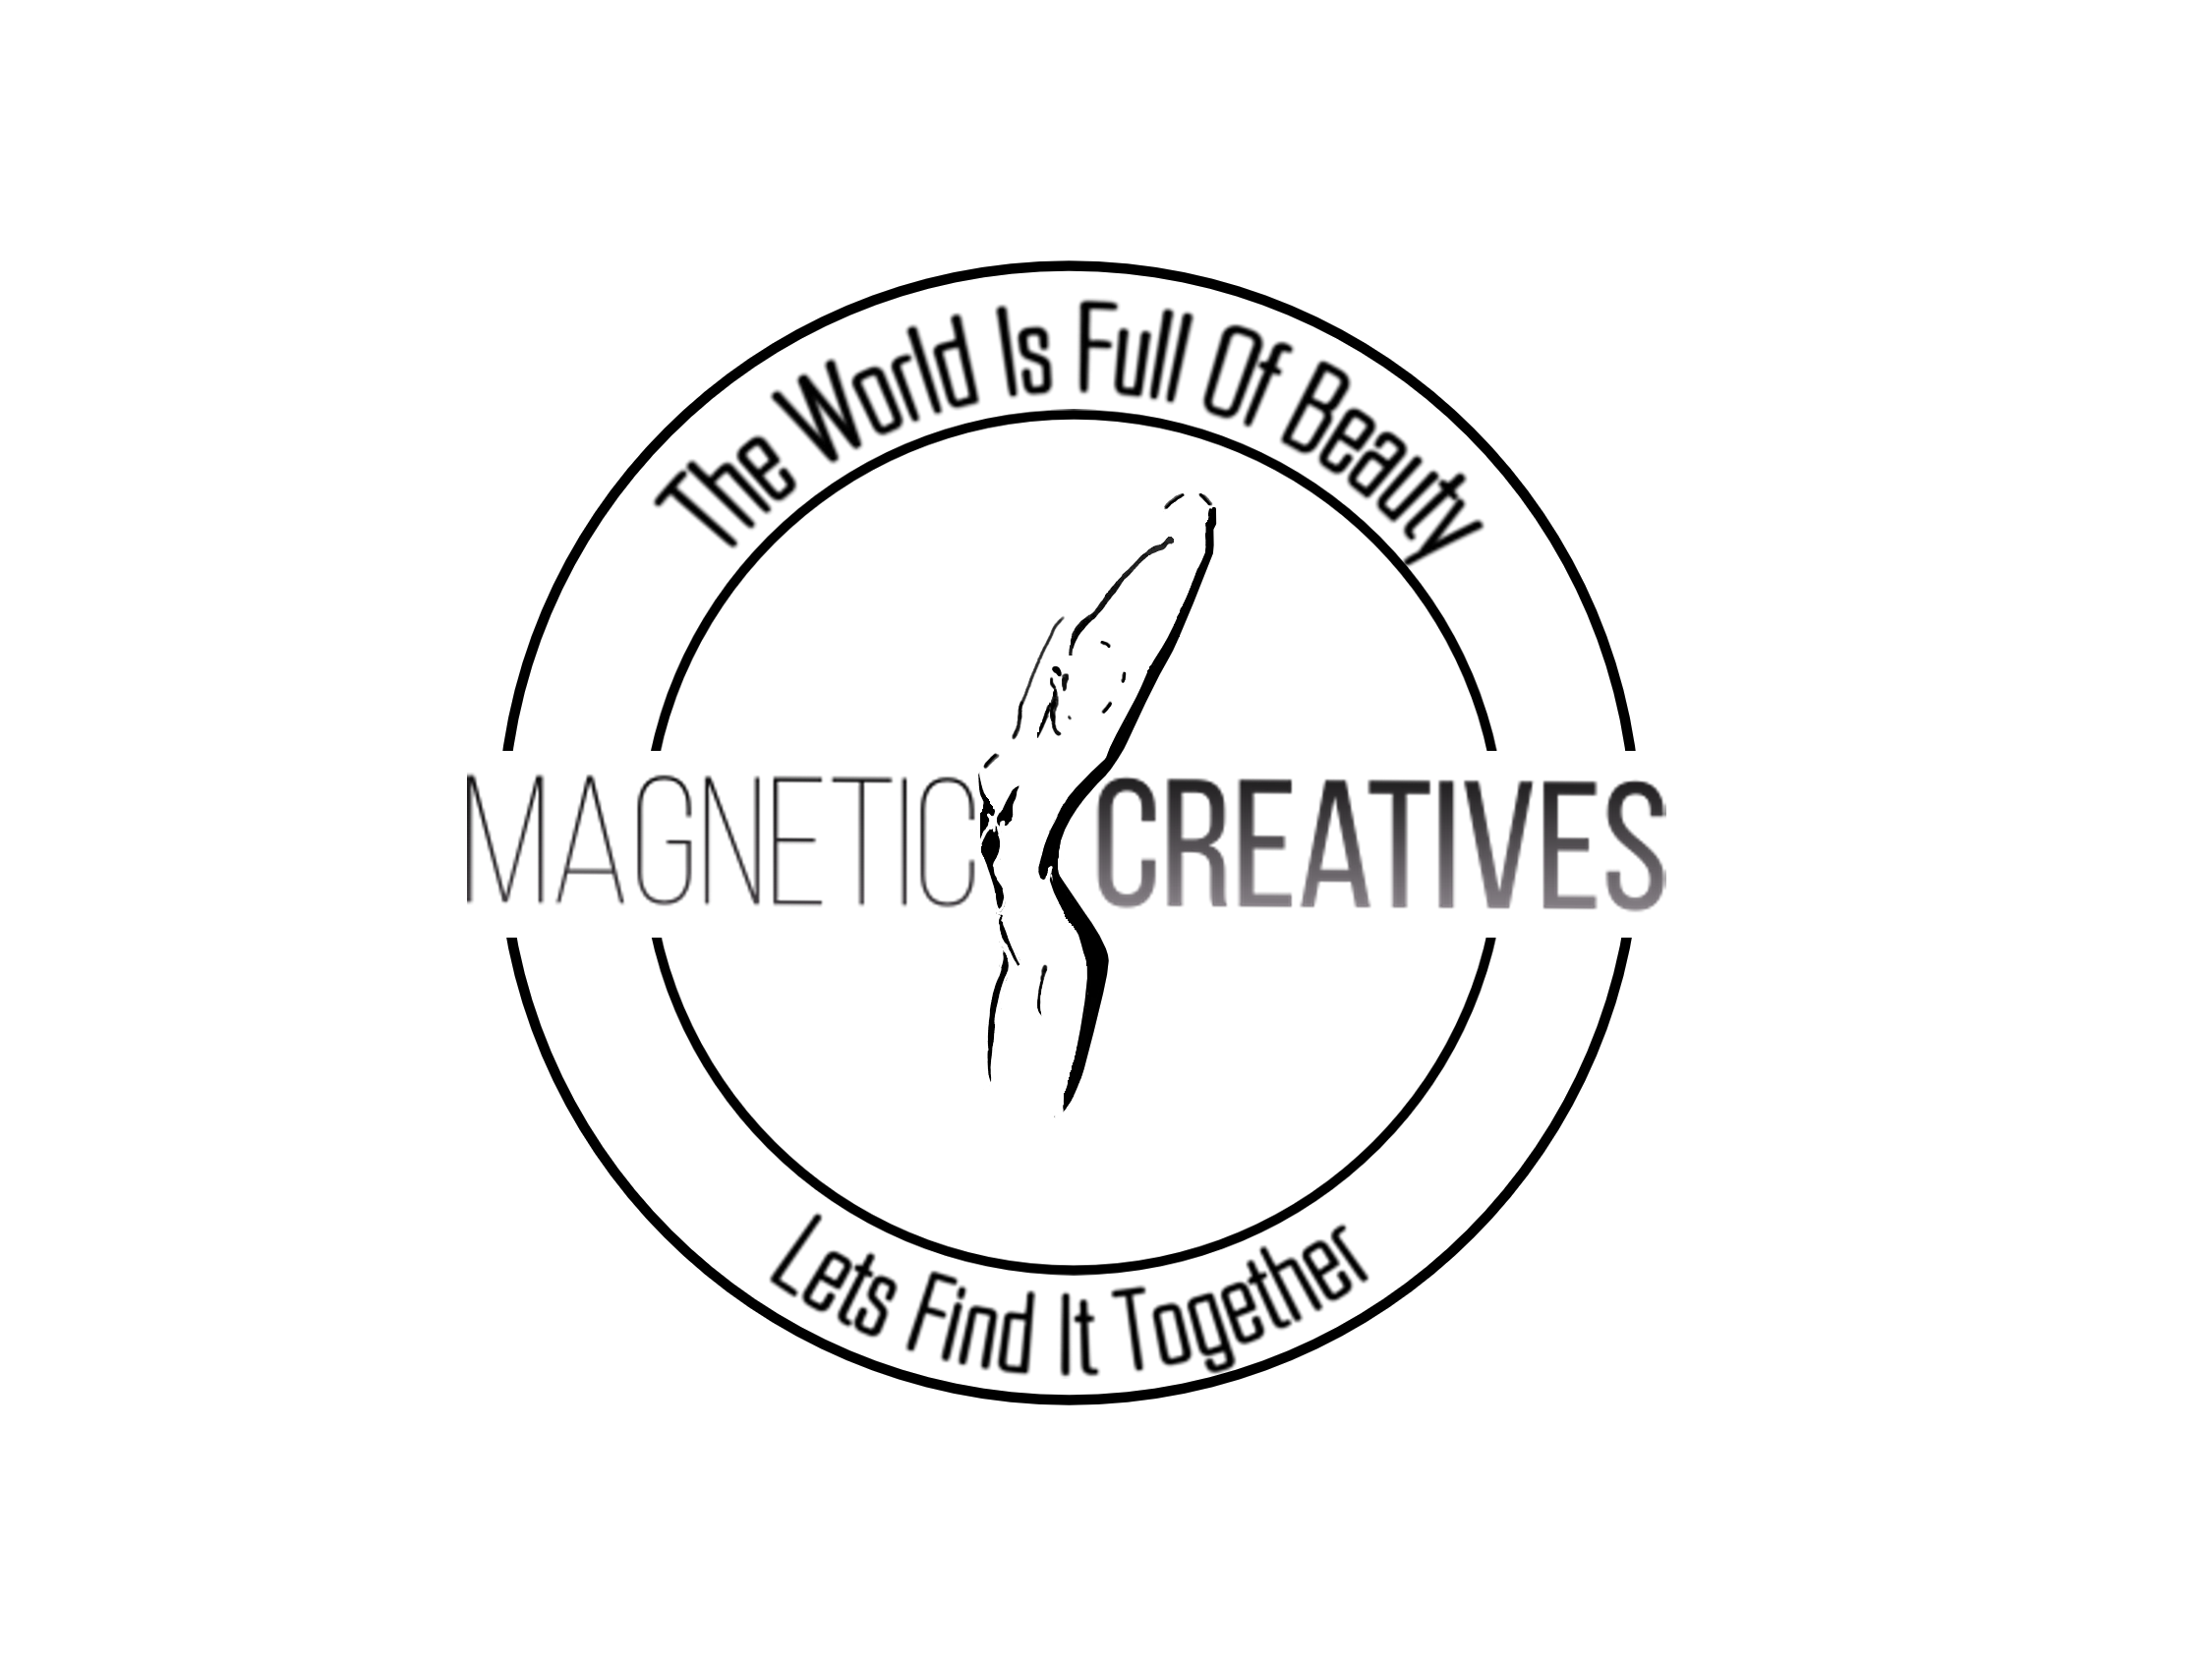 Magnetic Creatives